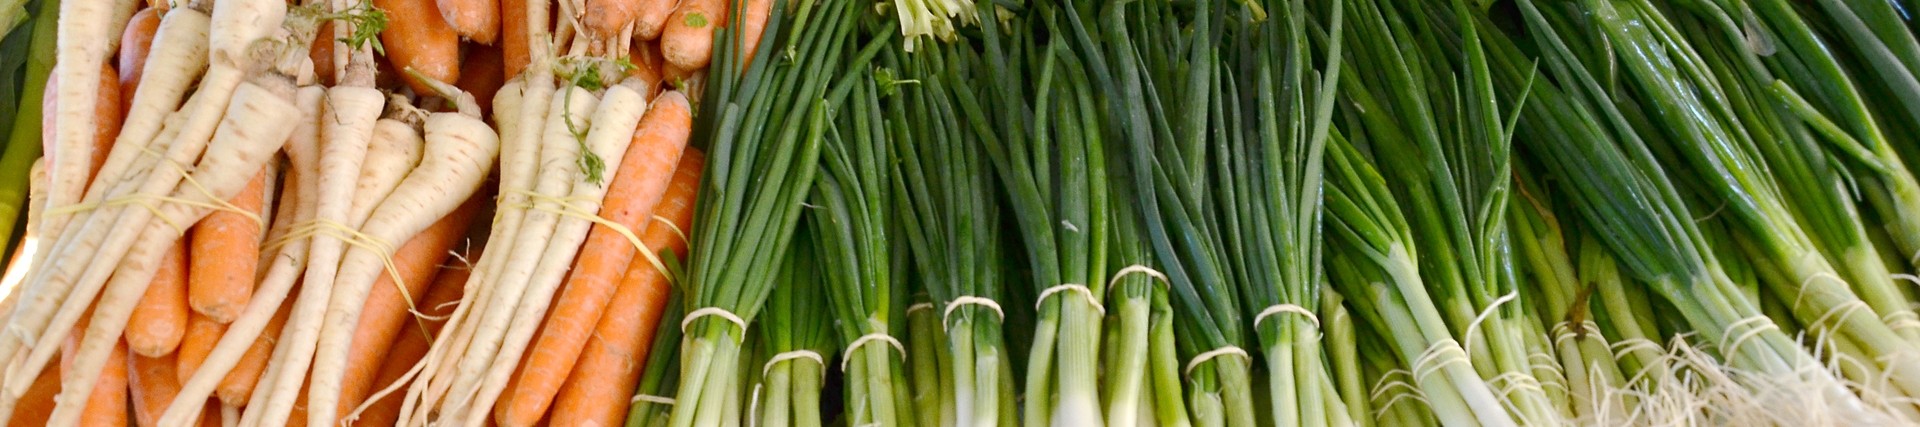 Spring onions, carrots, raddishes and parsnips at a market stall